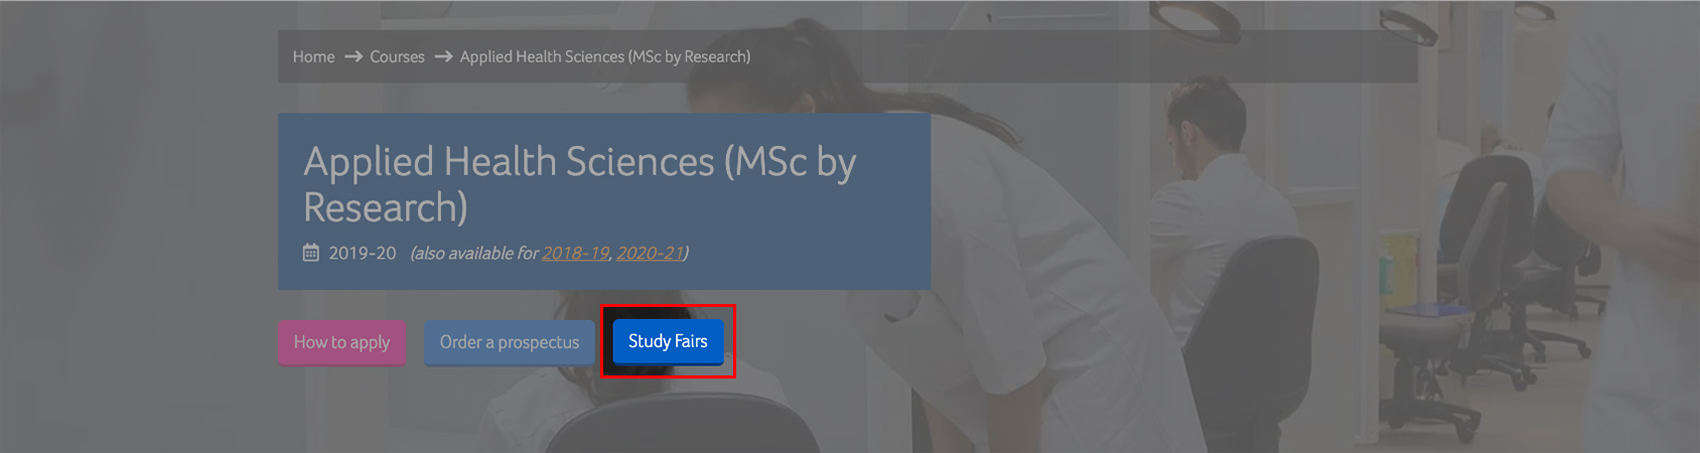 A screenshot of the coursefinder application with the study fair button highlighted.